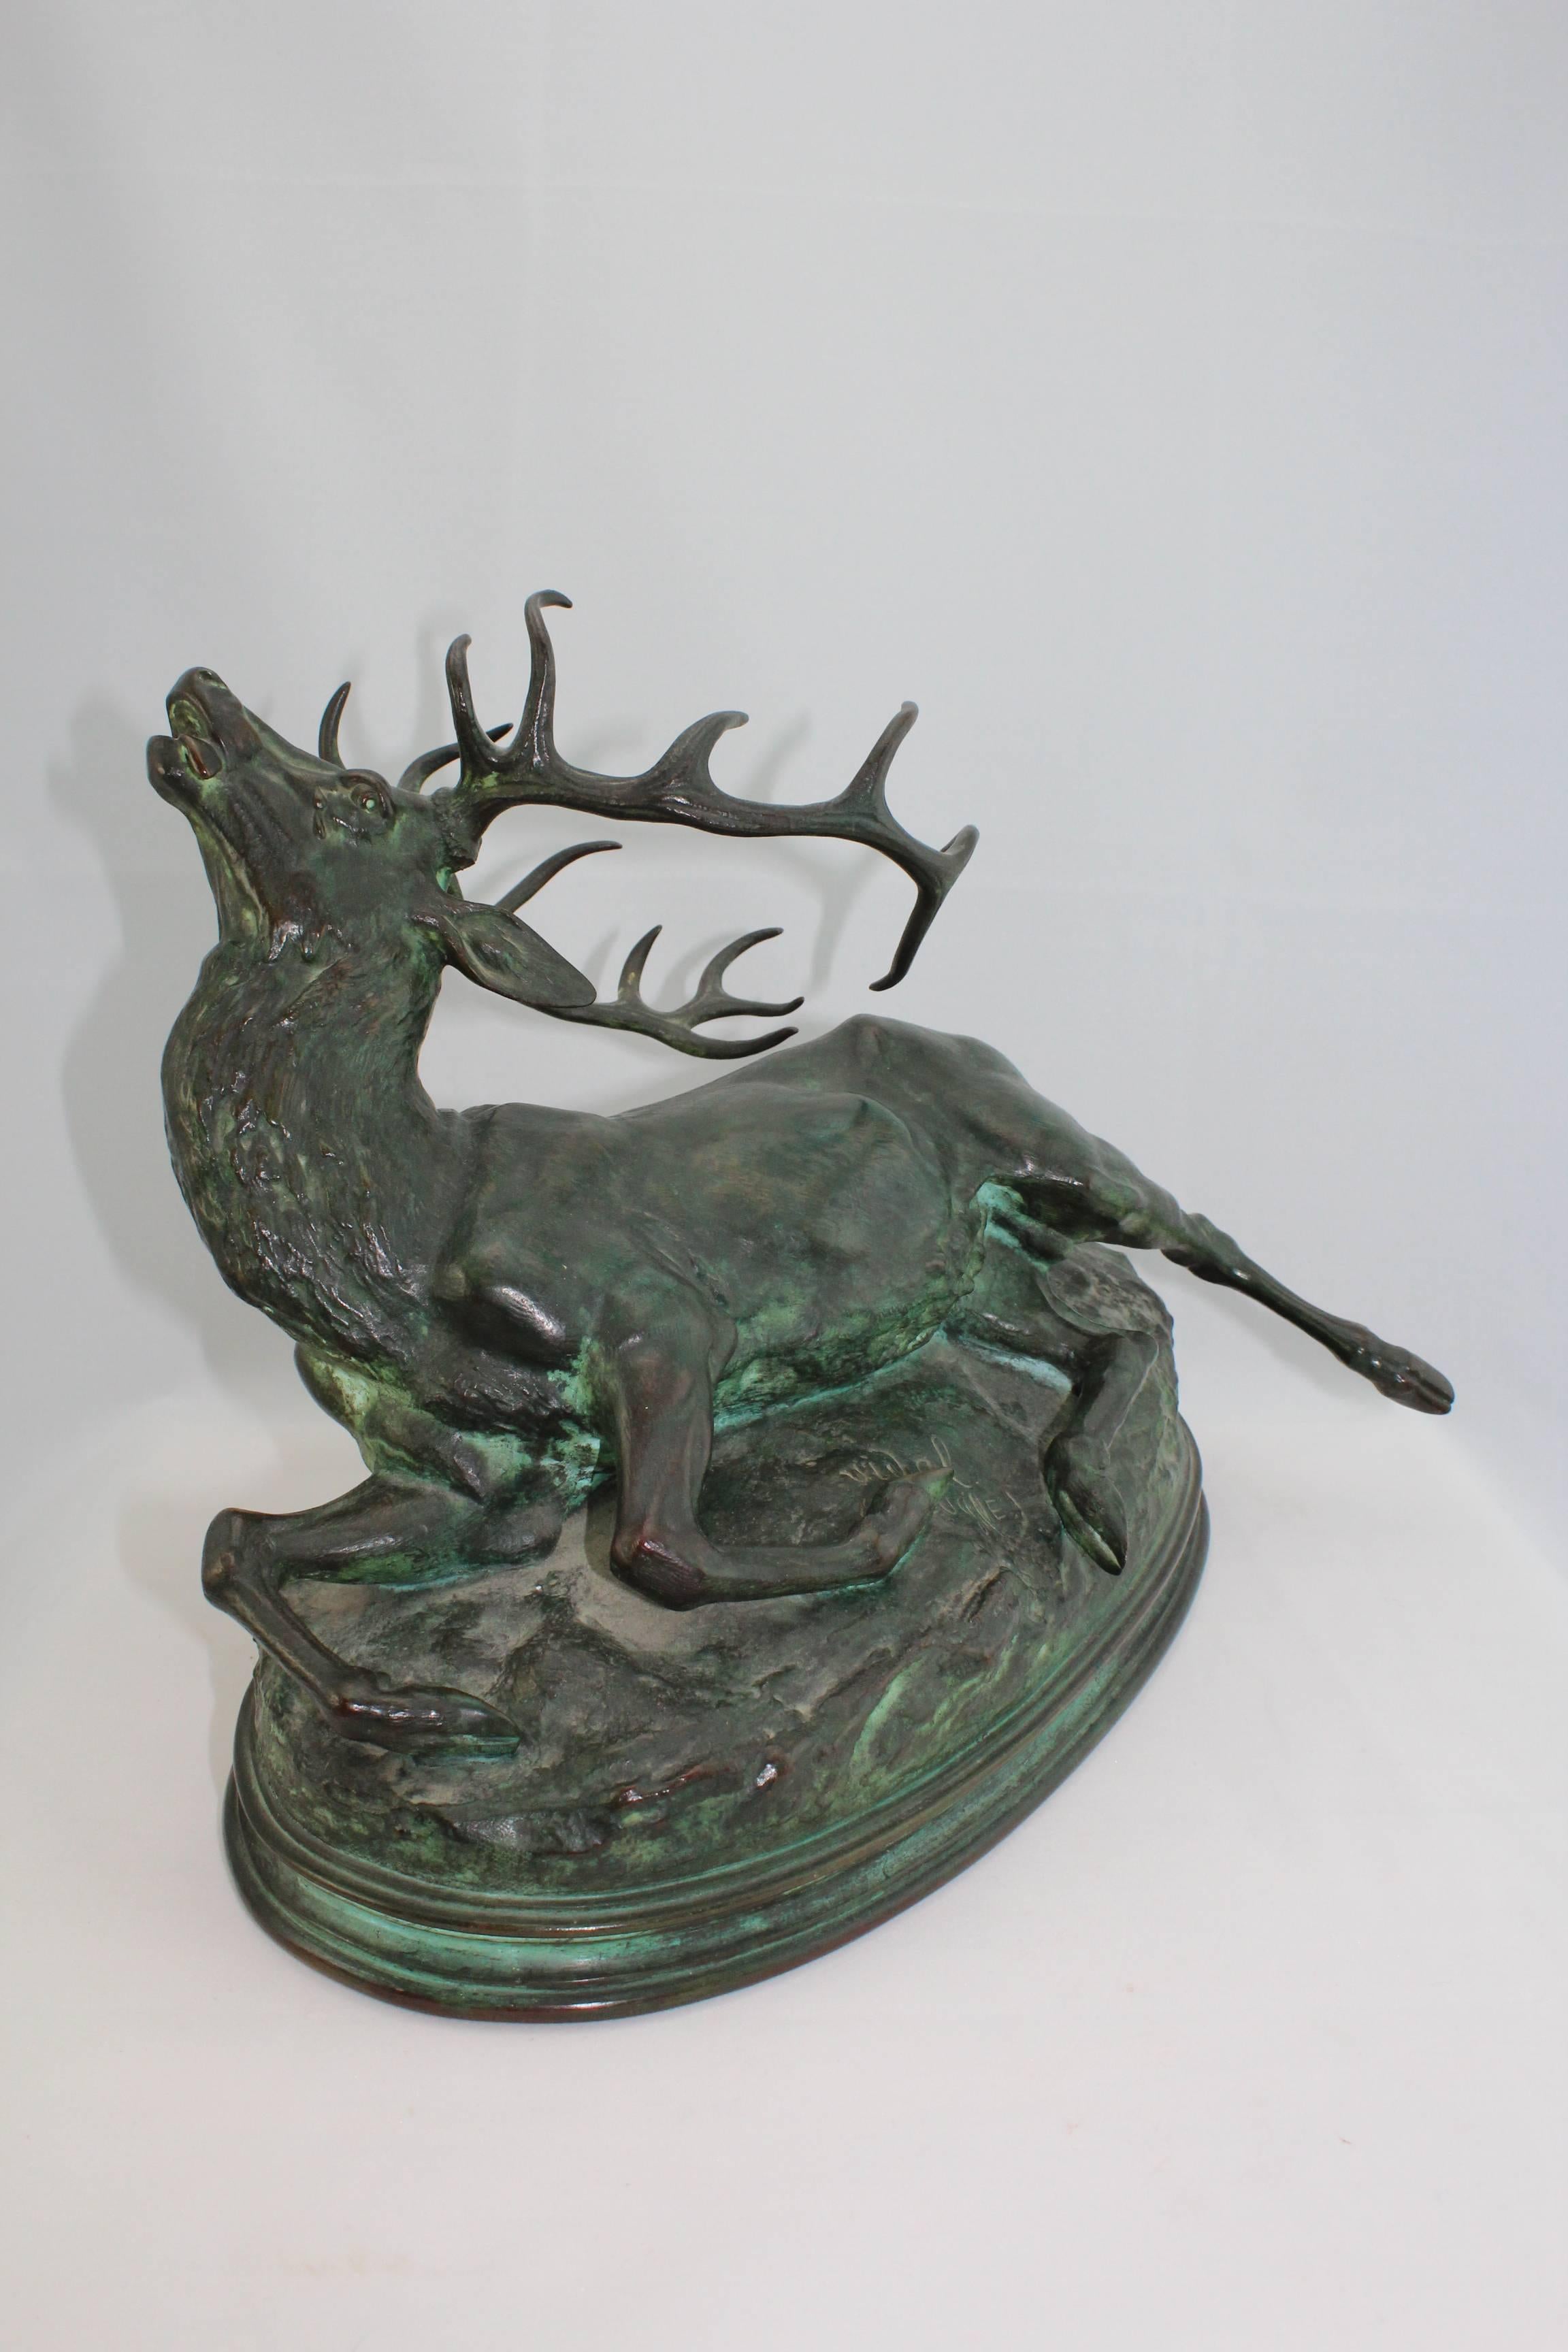 Louis Vidal (1831-1892) A Mortally Wounded Stag Deer or Elk, Bronze, 10 by 14 by 9 inches, Signed 